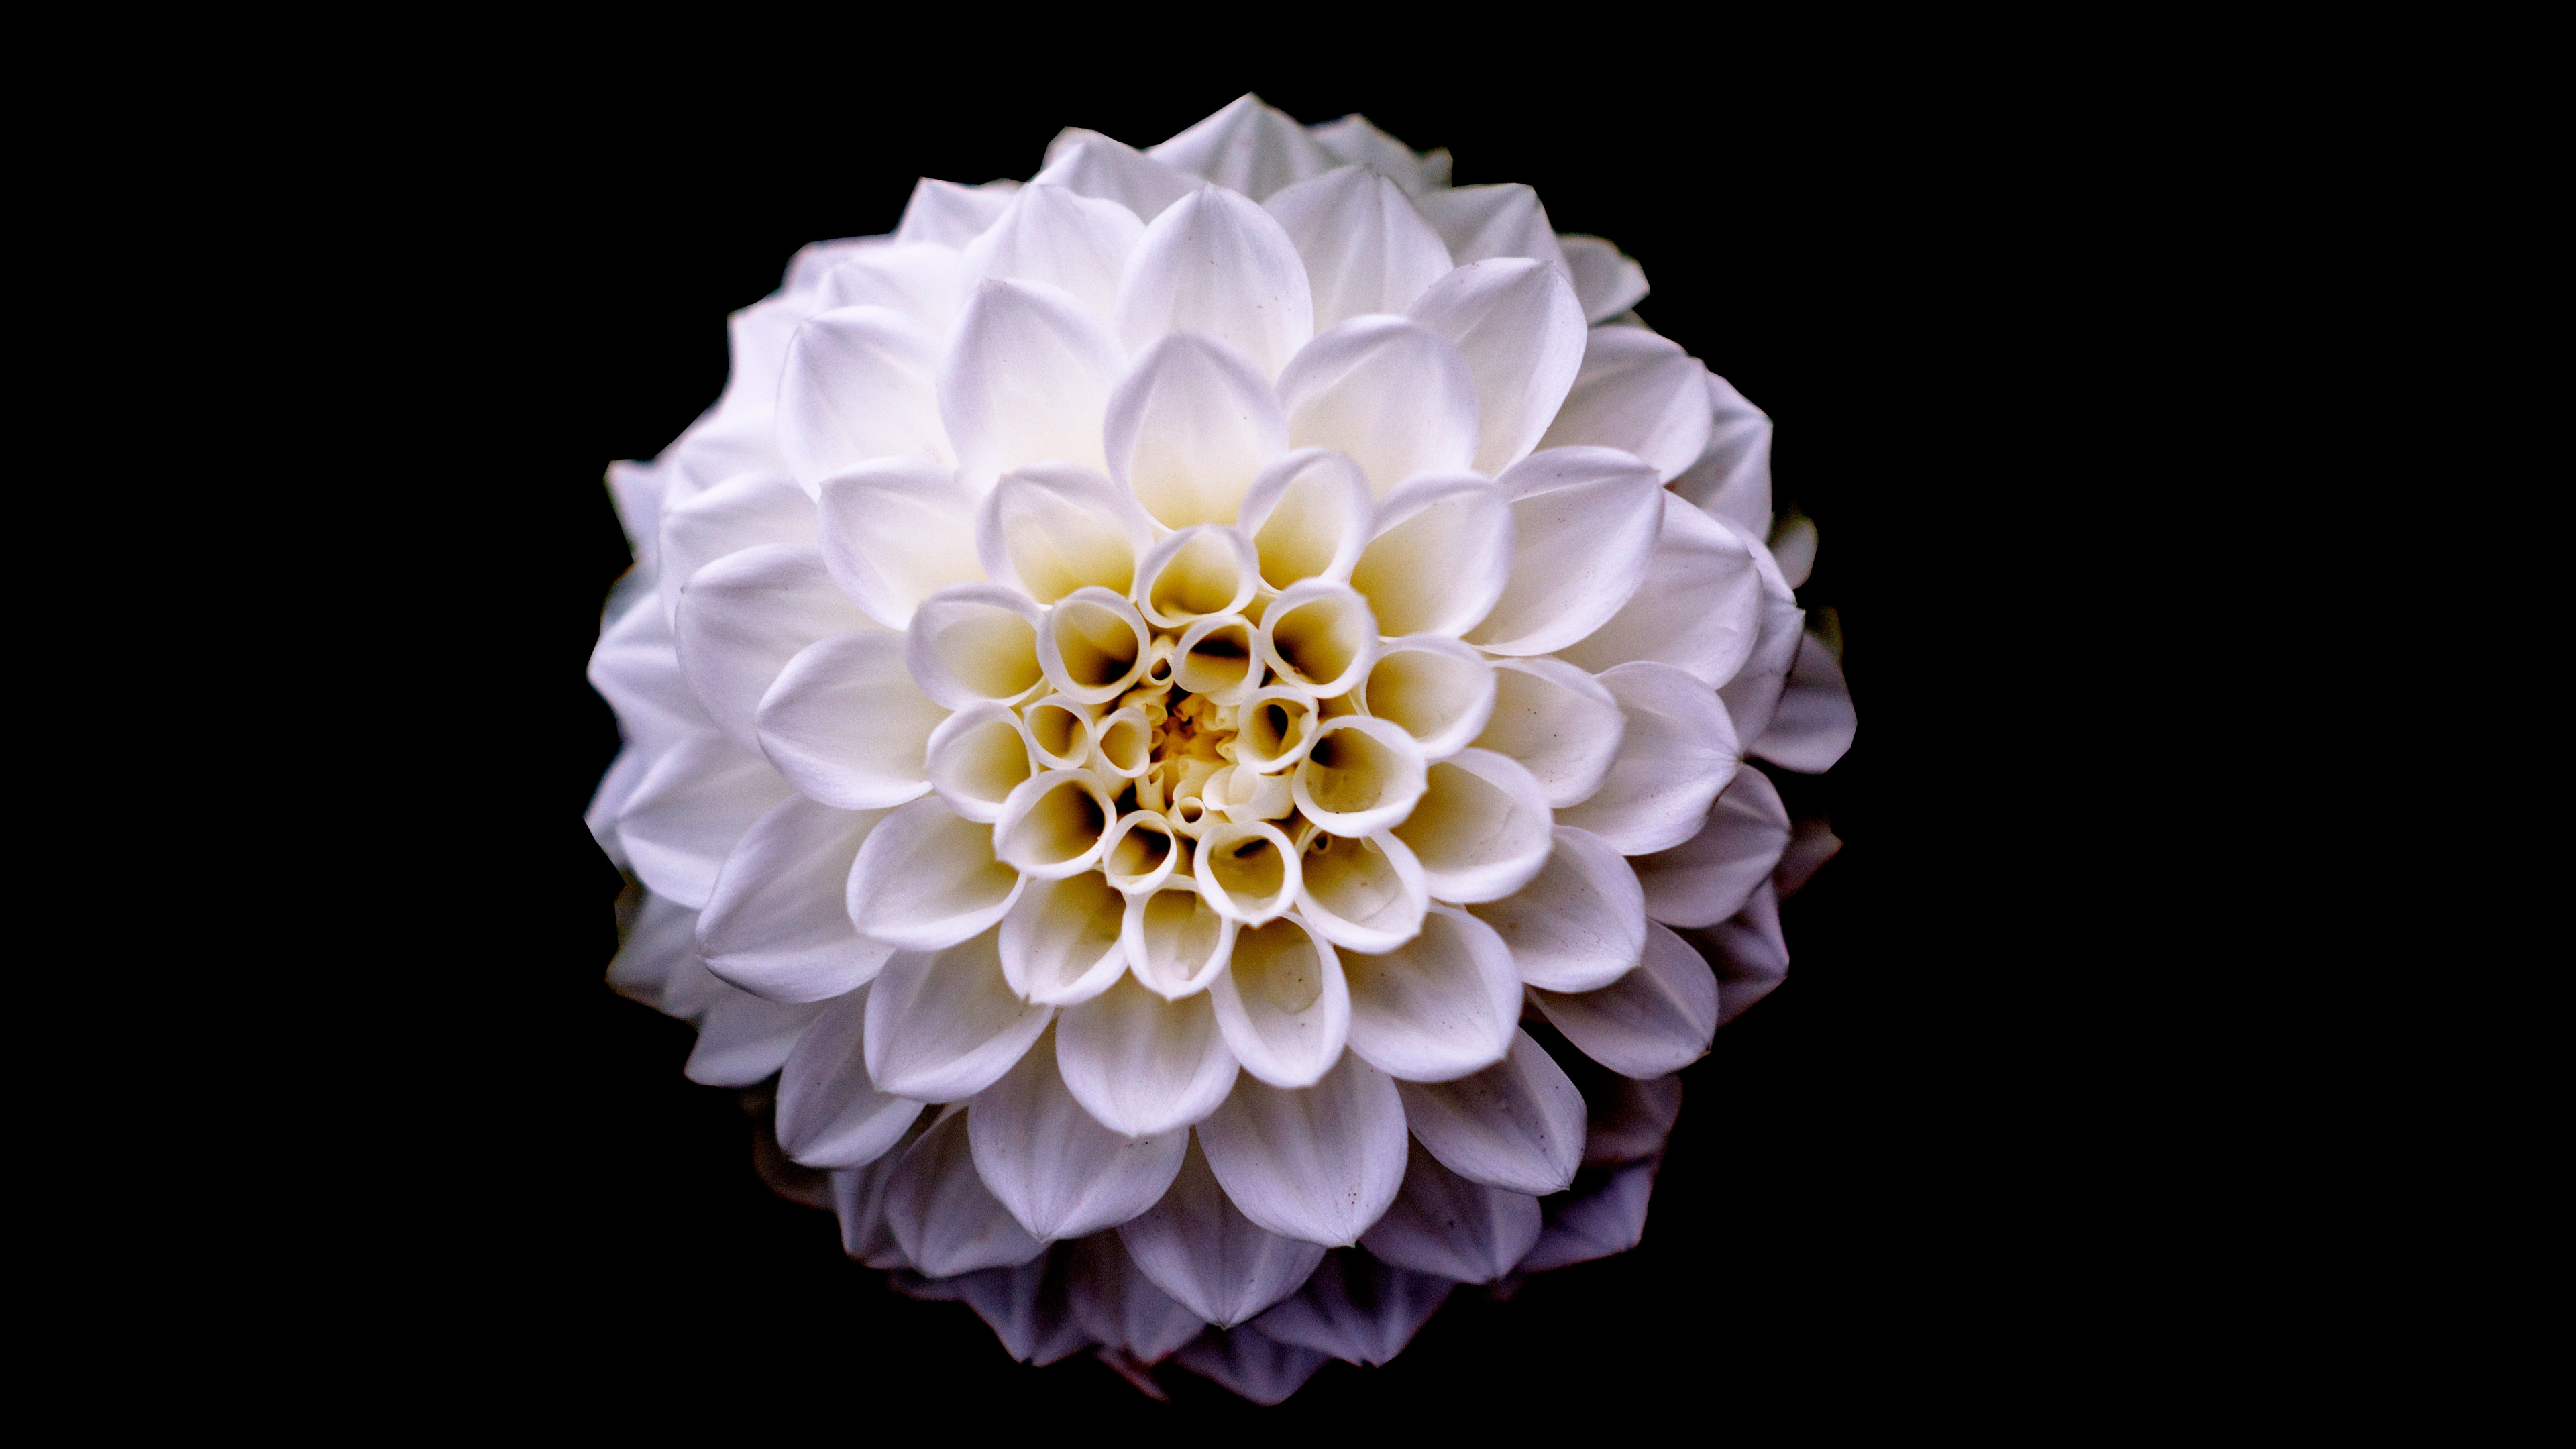 White Flower With Black Background. Wallpaper in 3840x2160 Resolution